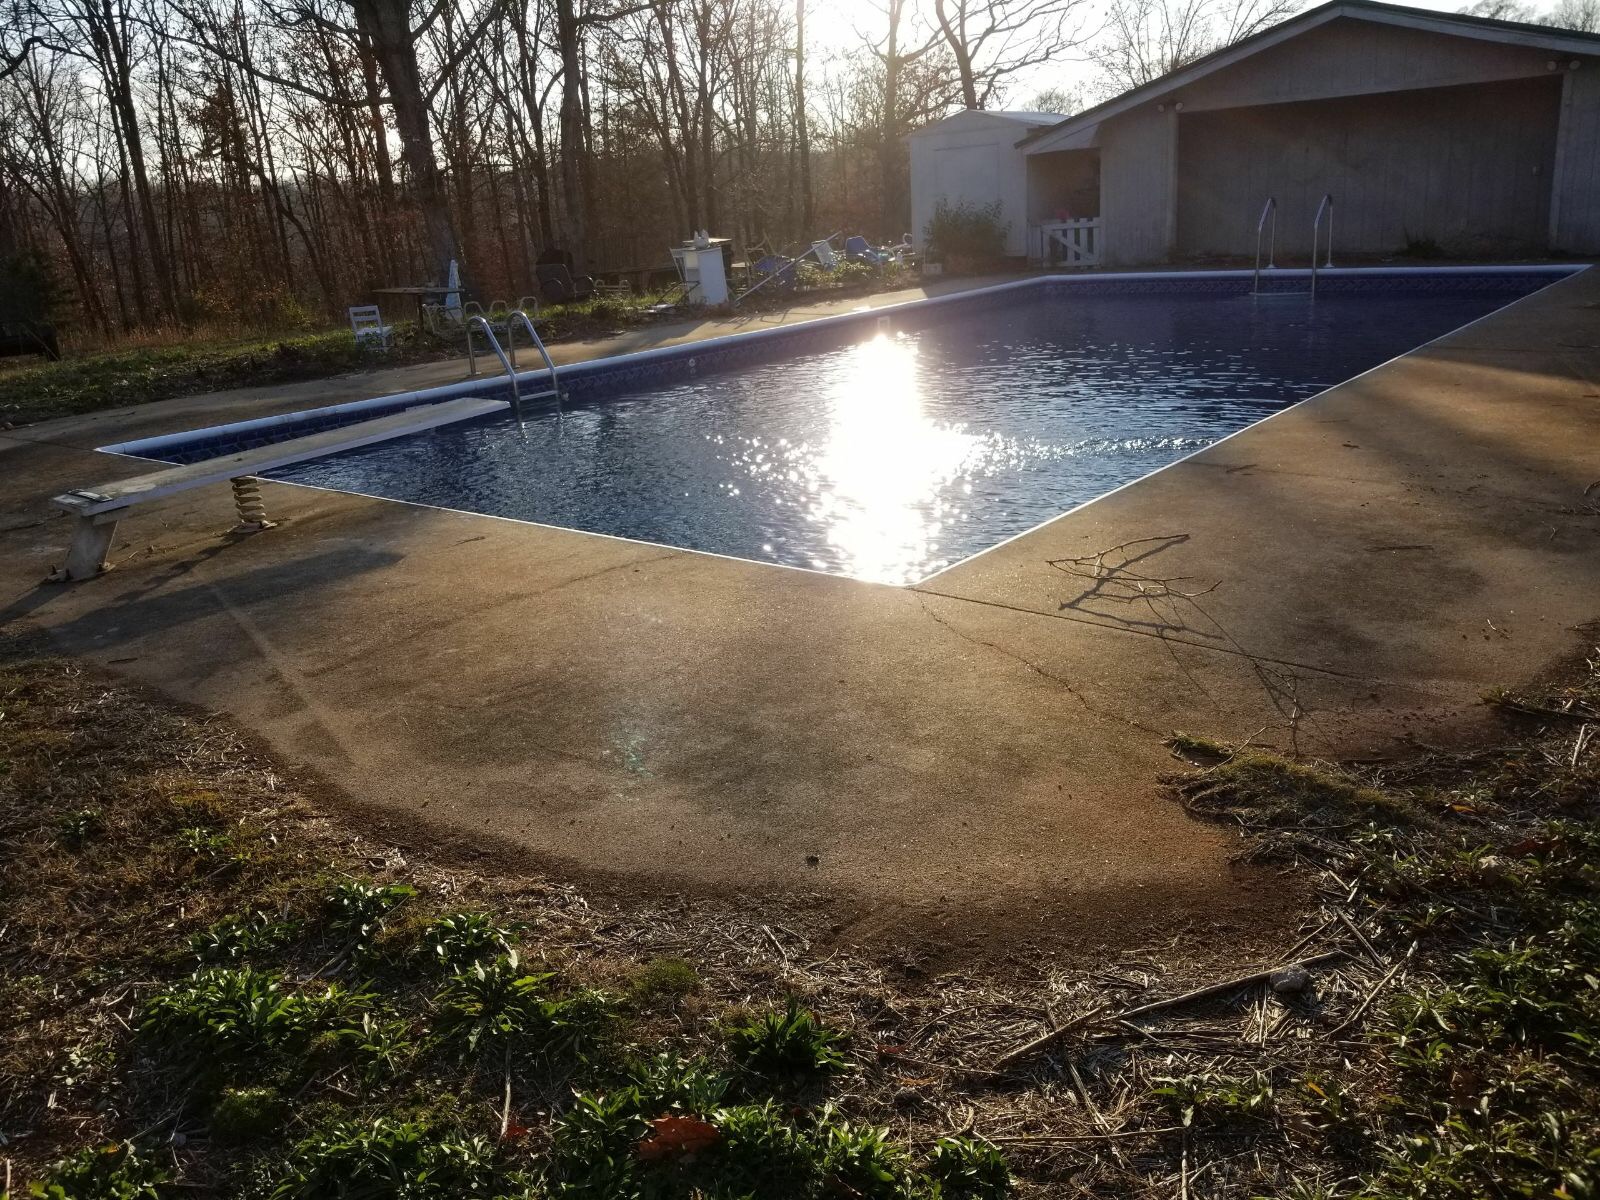 Before: A not so inviting pool!